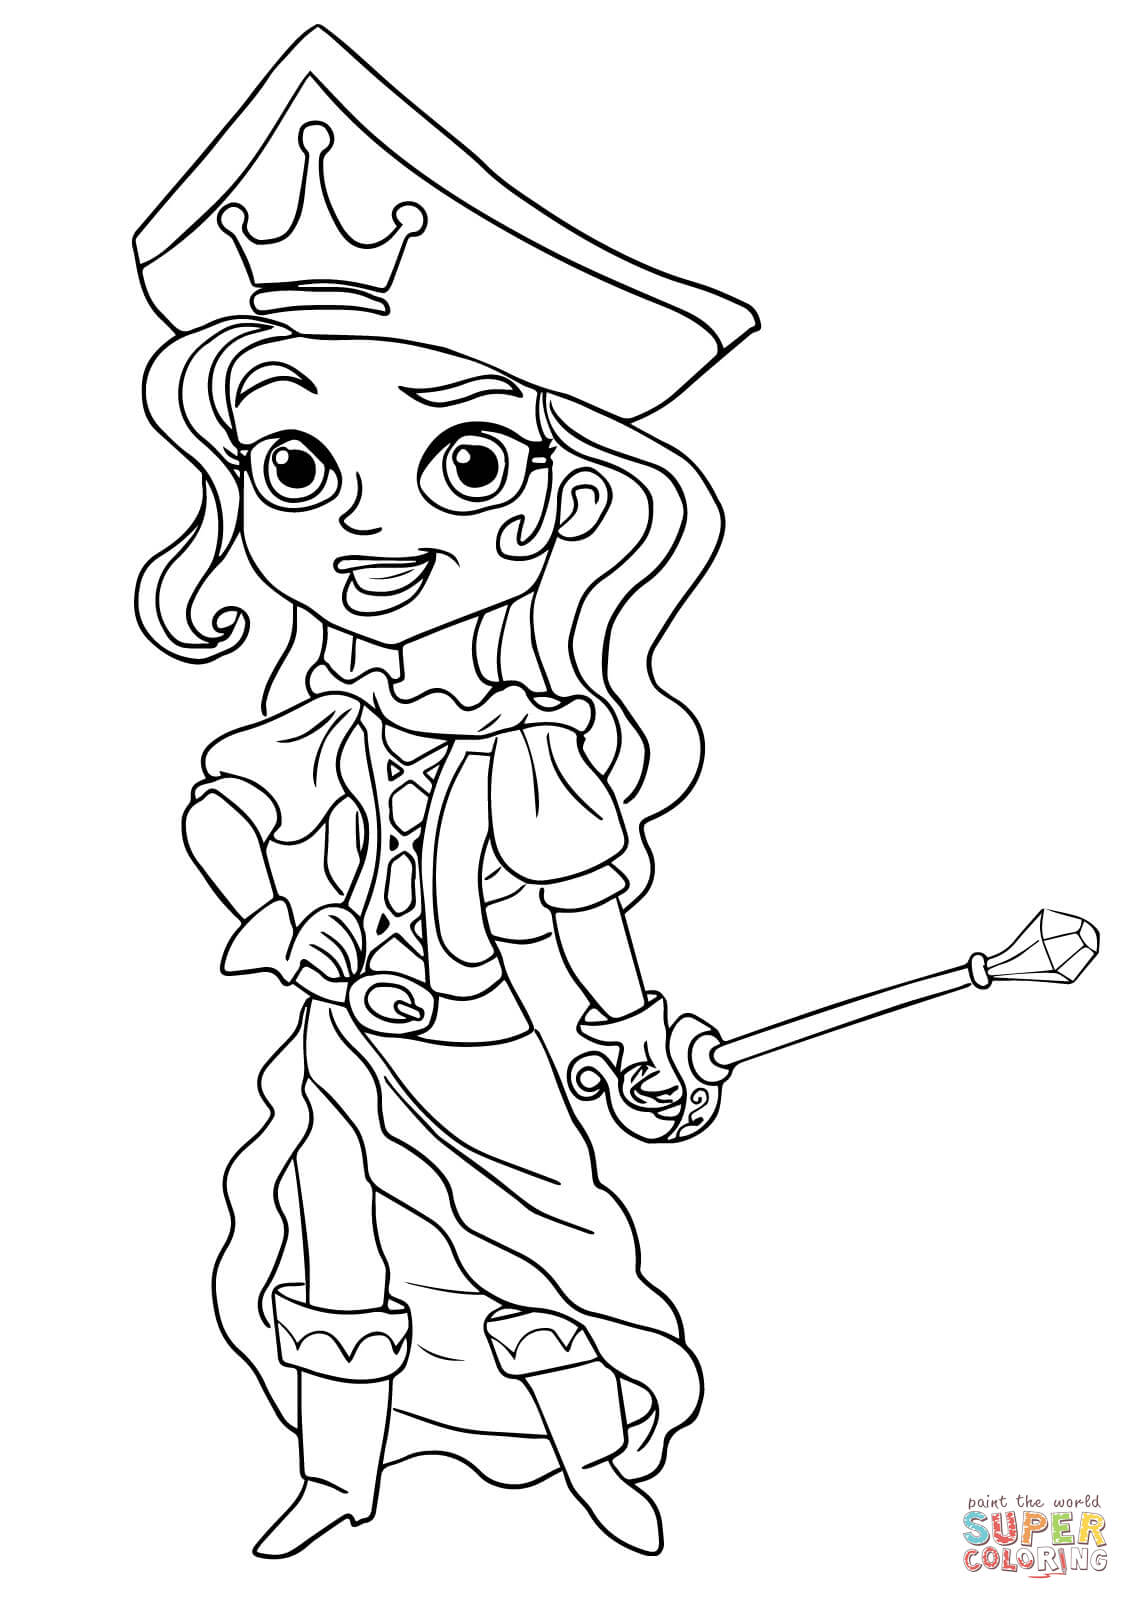 pirate-coloring-pages-free-printable-at-getdrawings-free-download